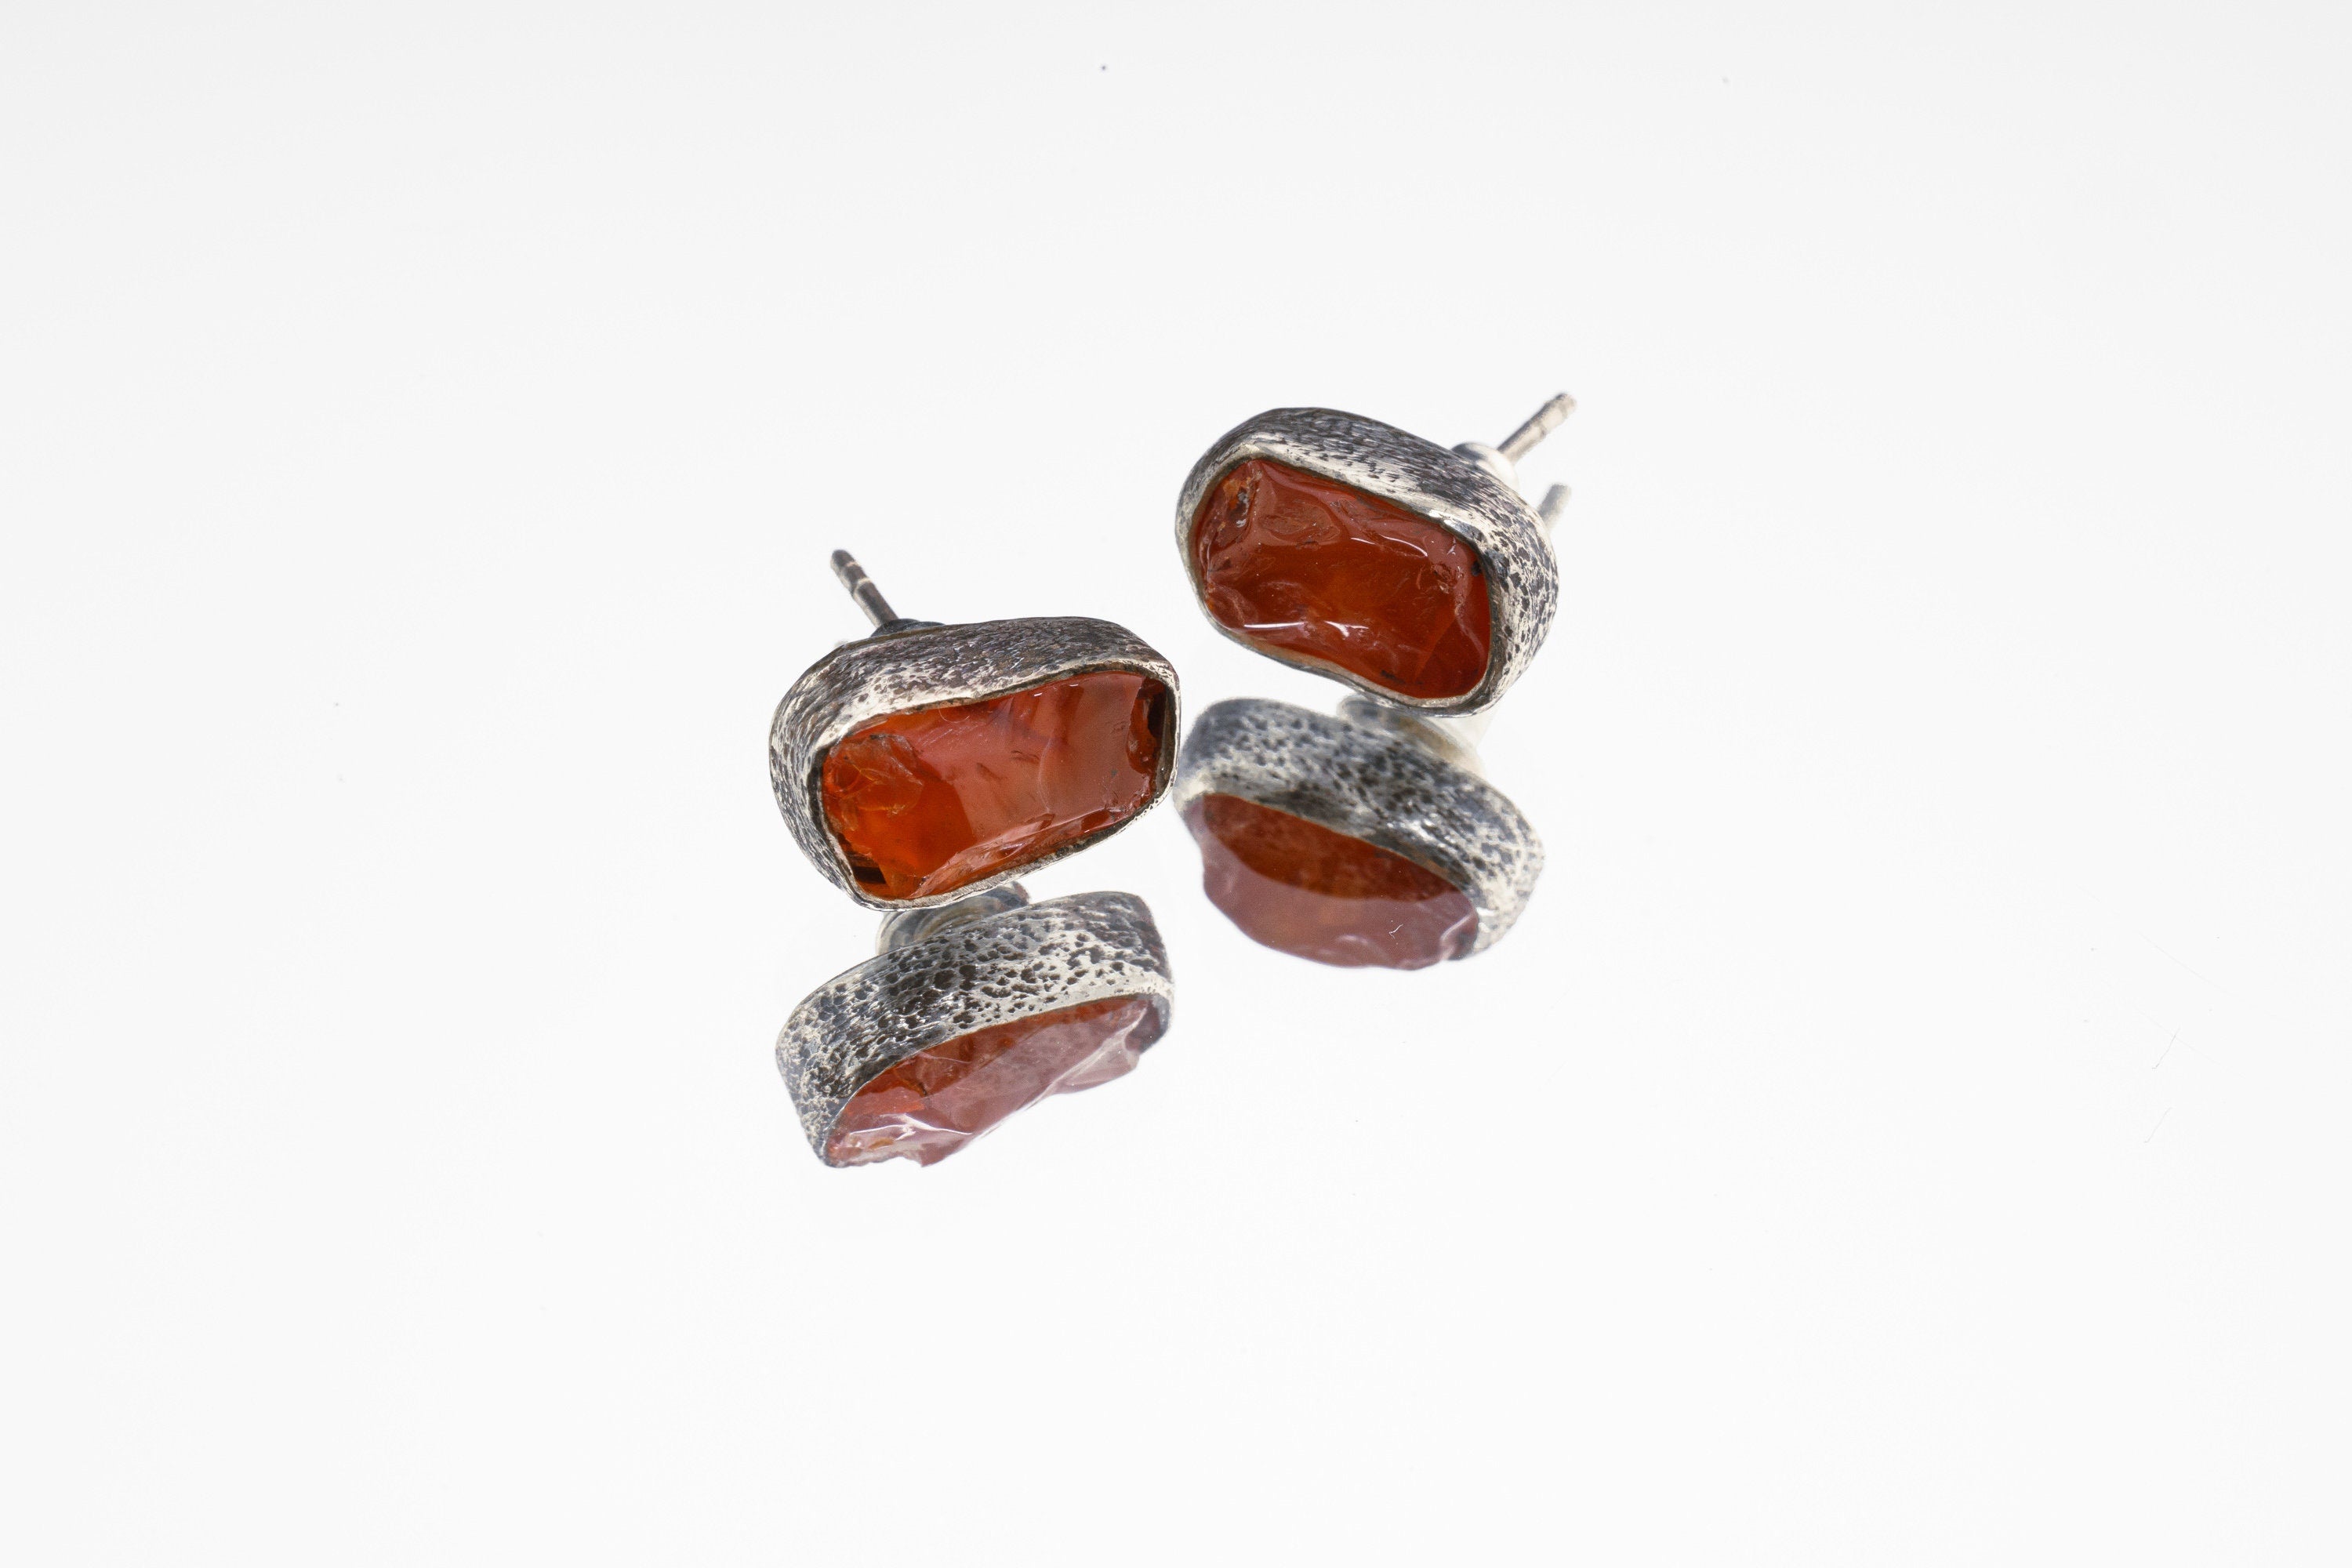 Organic shaped Carnelian Agate Pair- Textured Finish - Sterling Silver - Freeform Earring Studs